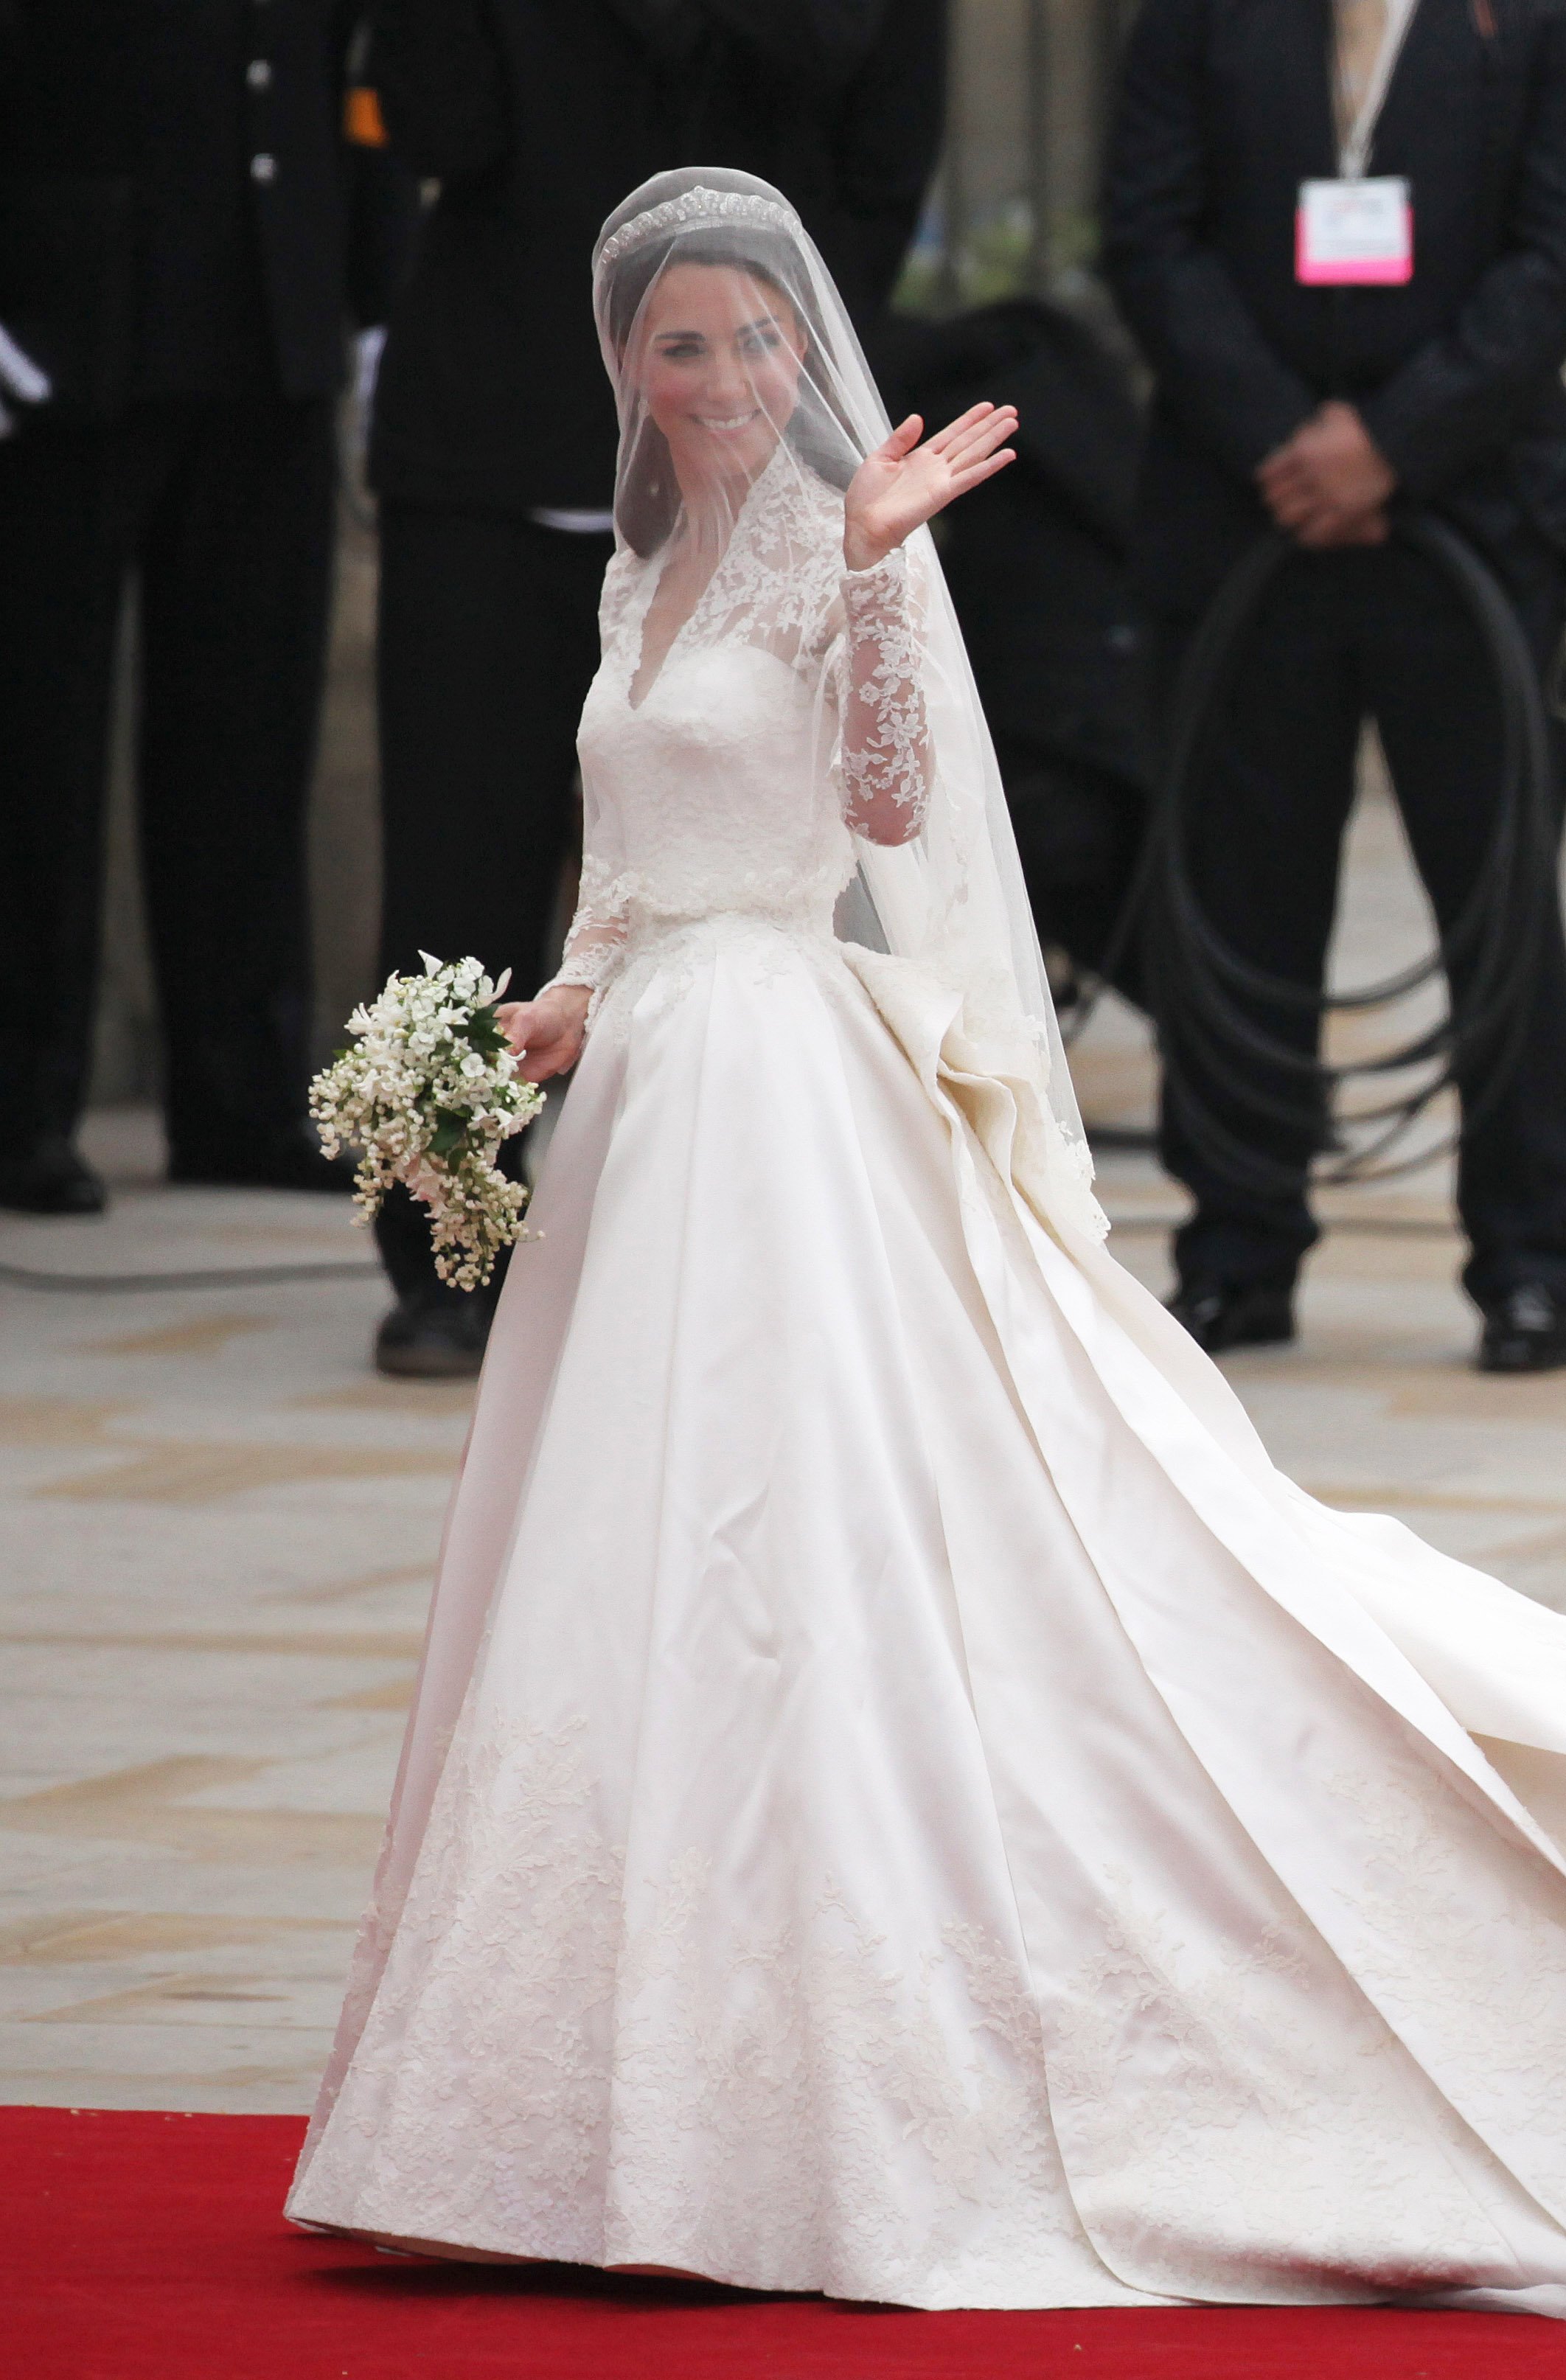 Catherine Middleton waves to the crowds as she arrives at Westmister Abbey on April 29, 2011. | Photo: GettyImages